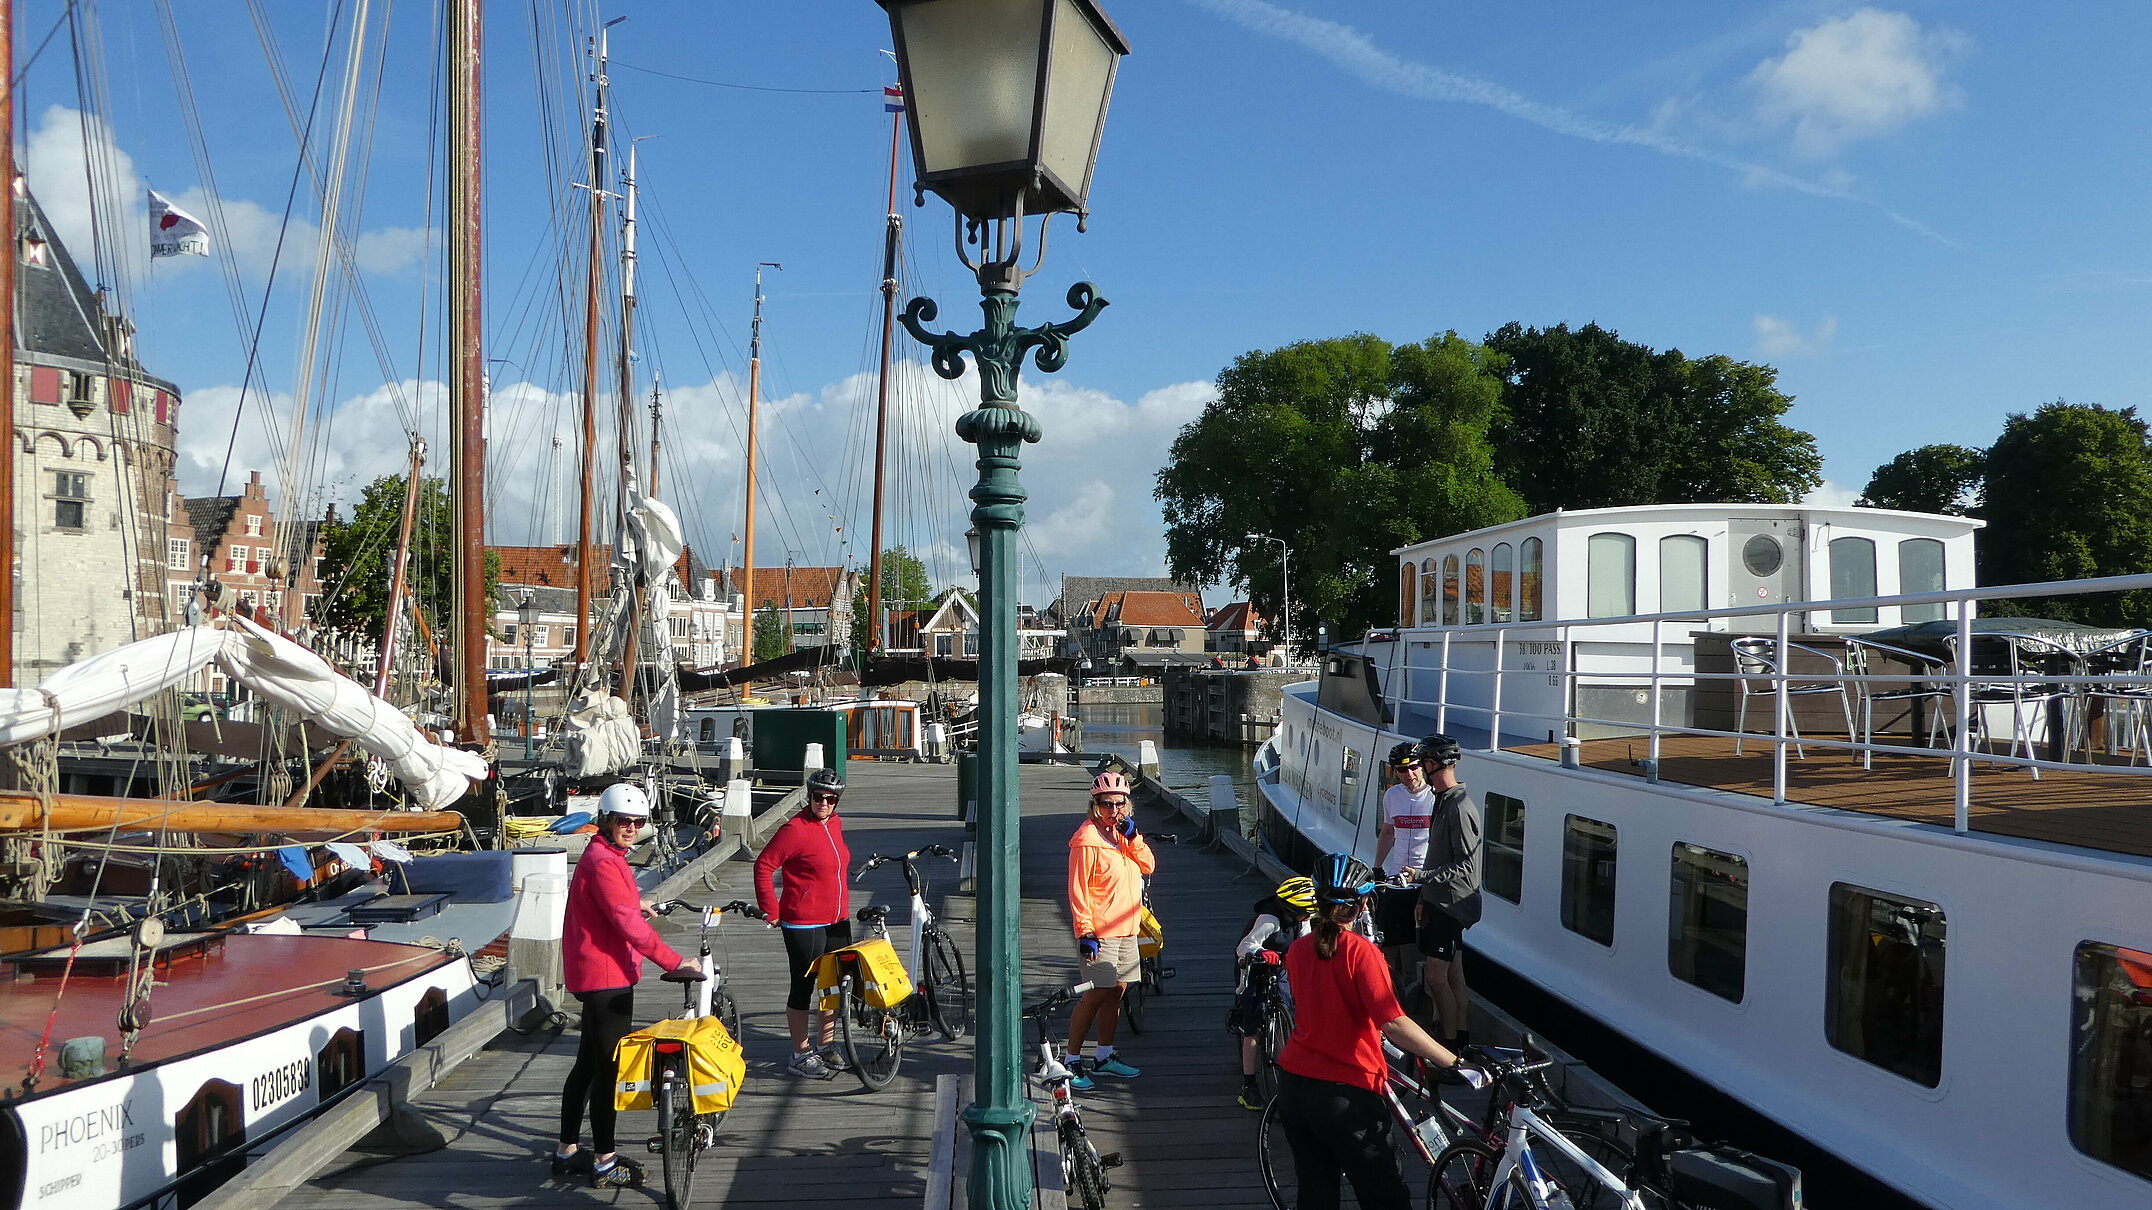 Cycletours Holidays Barges Liza Marleen at the Dock